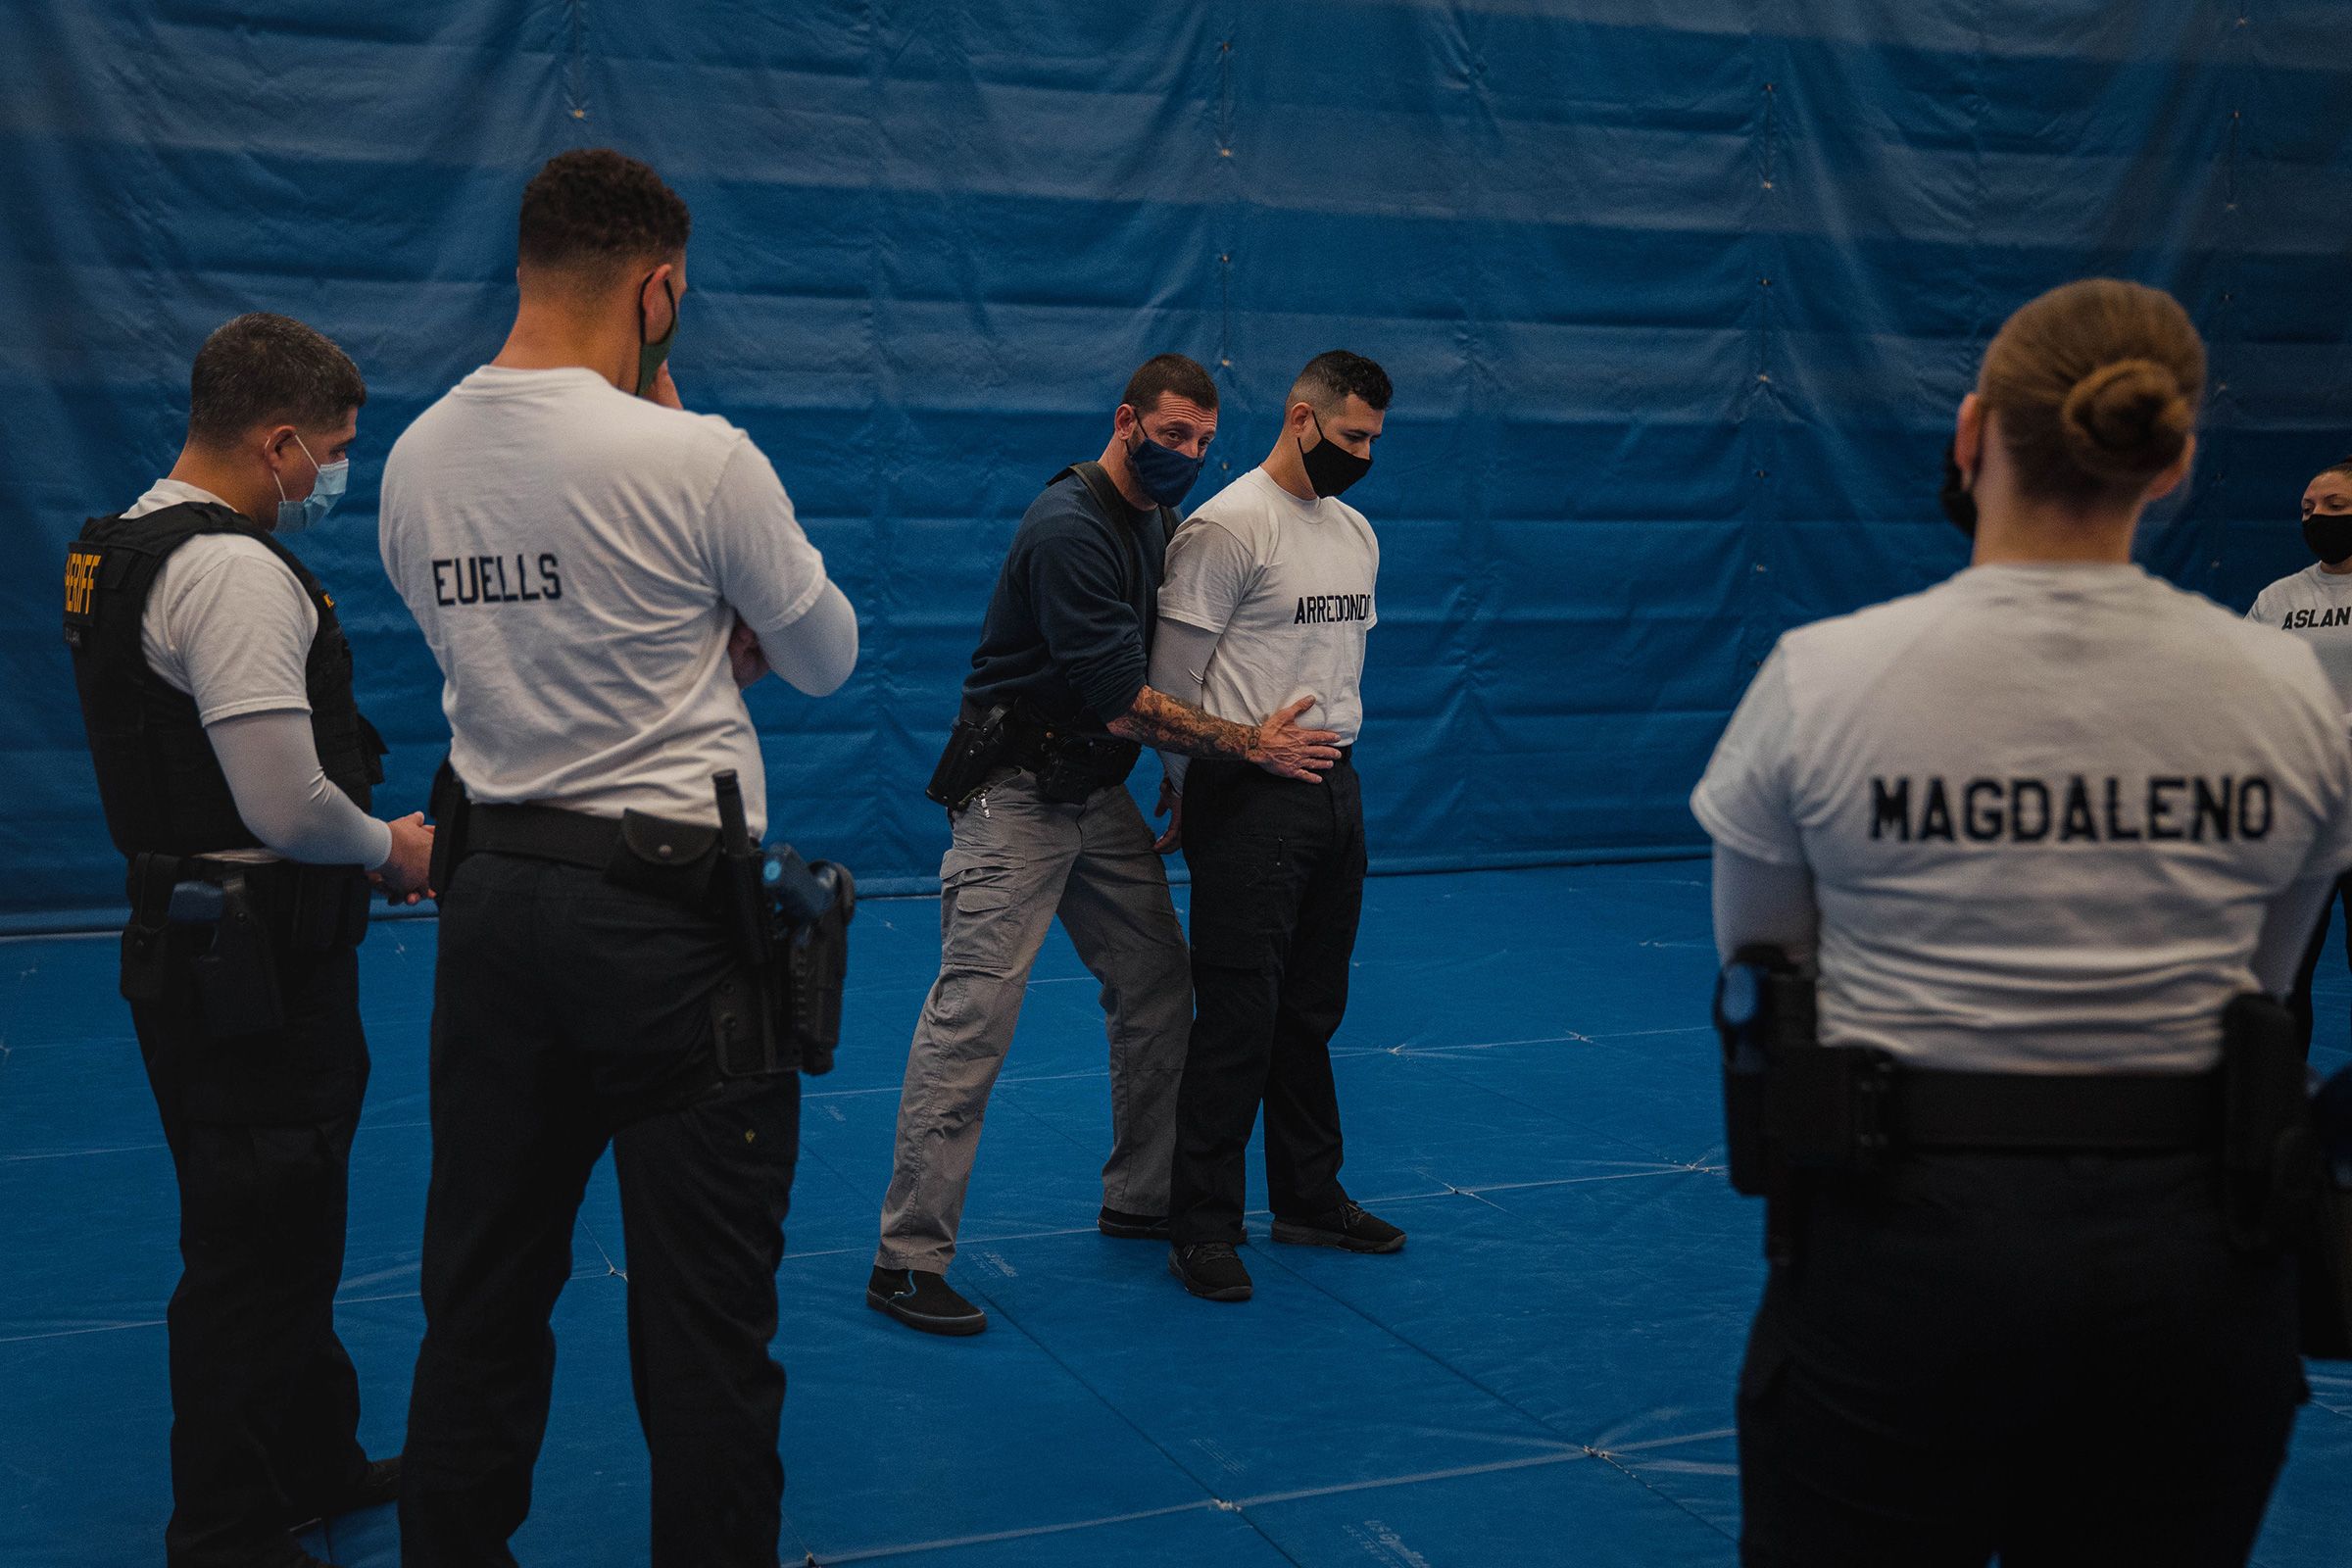 Instructor Javier Sola teaches frisking and handcuffing methods to future law enforcement officers at the state-run training facility in Washington state. (Jovelle Tamayo for TIME)